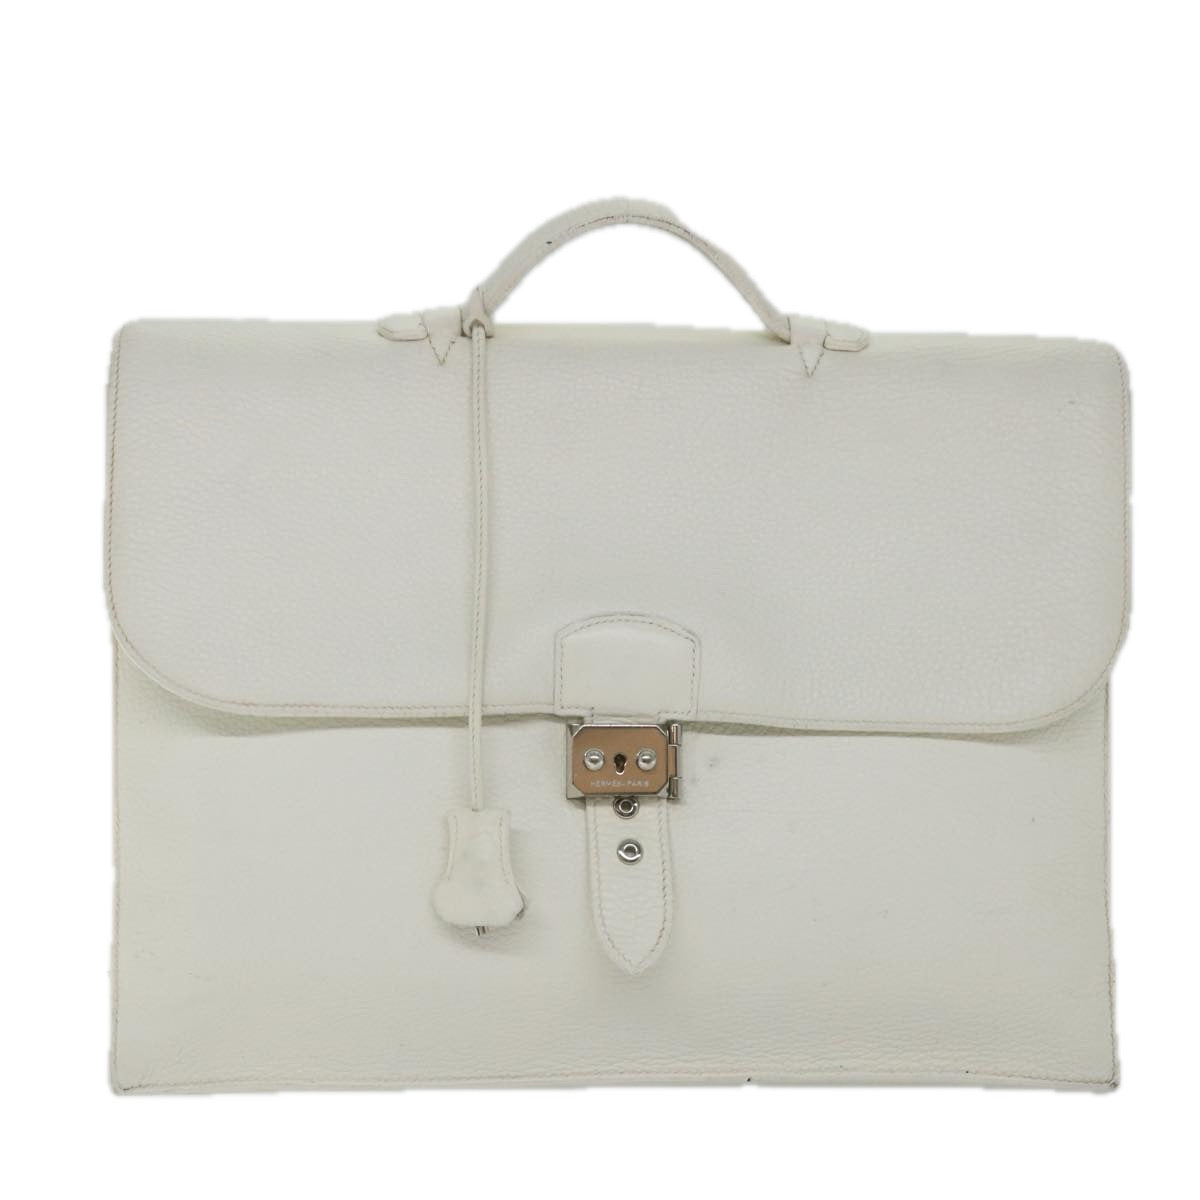 HERMES Sac Adepesh Business Bag Leather White Auth bs9397 - 0